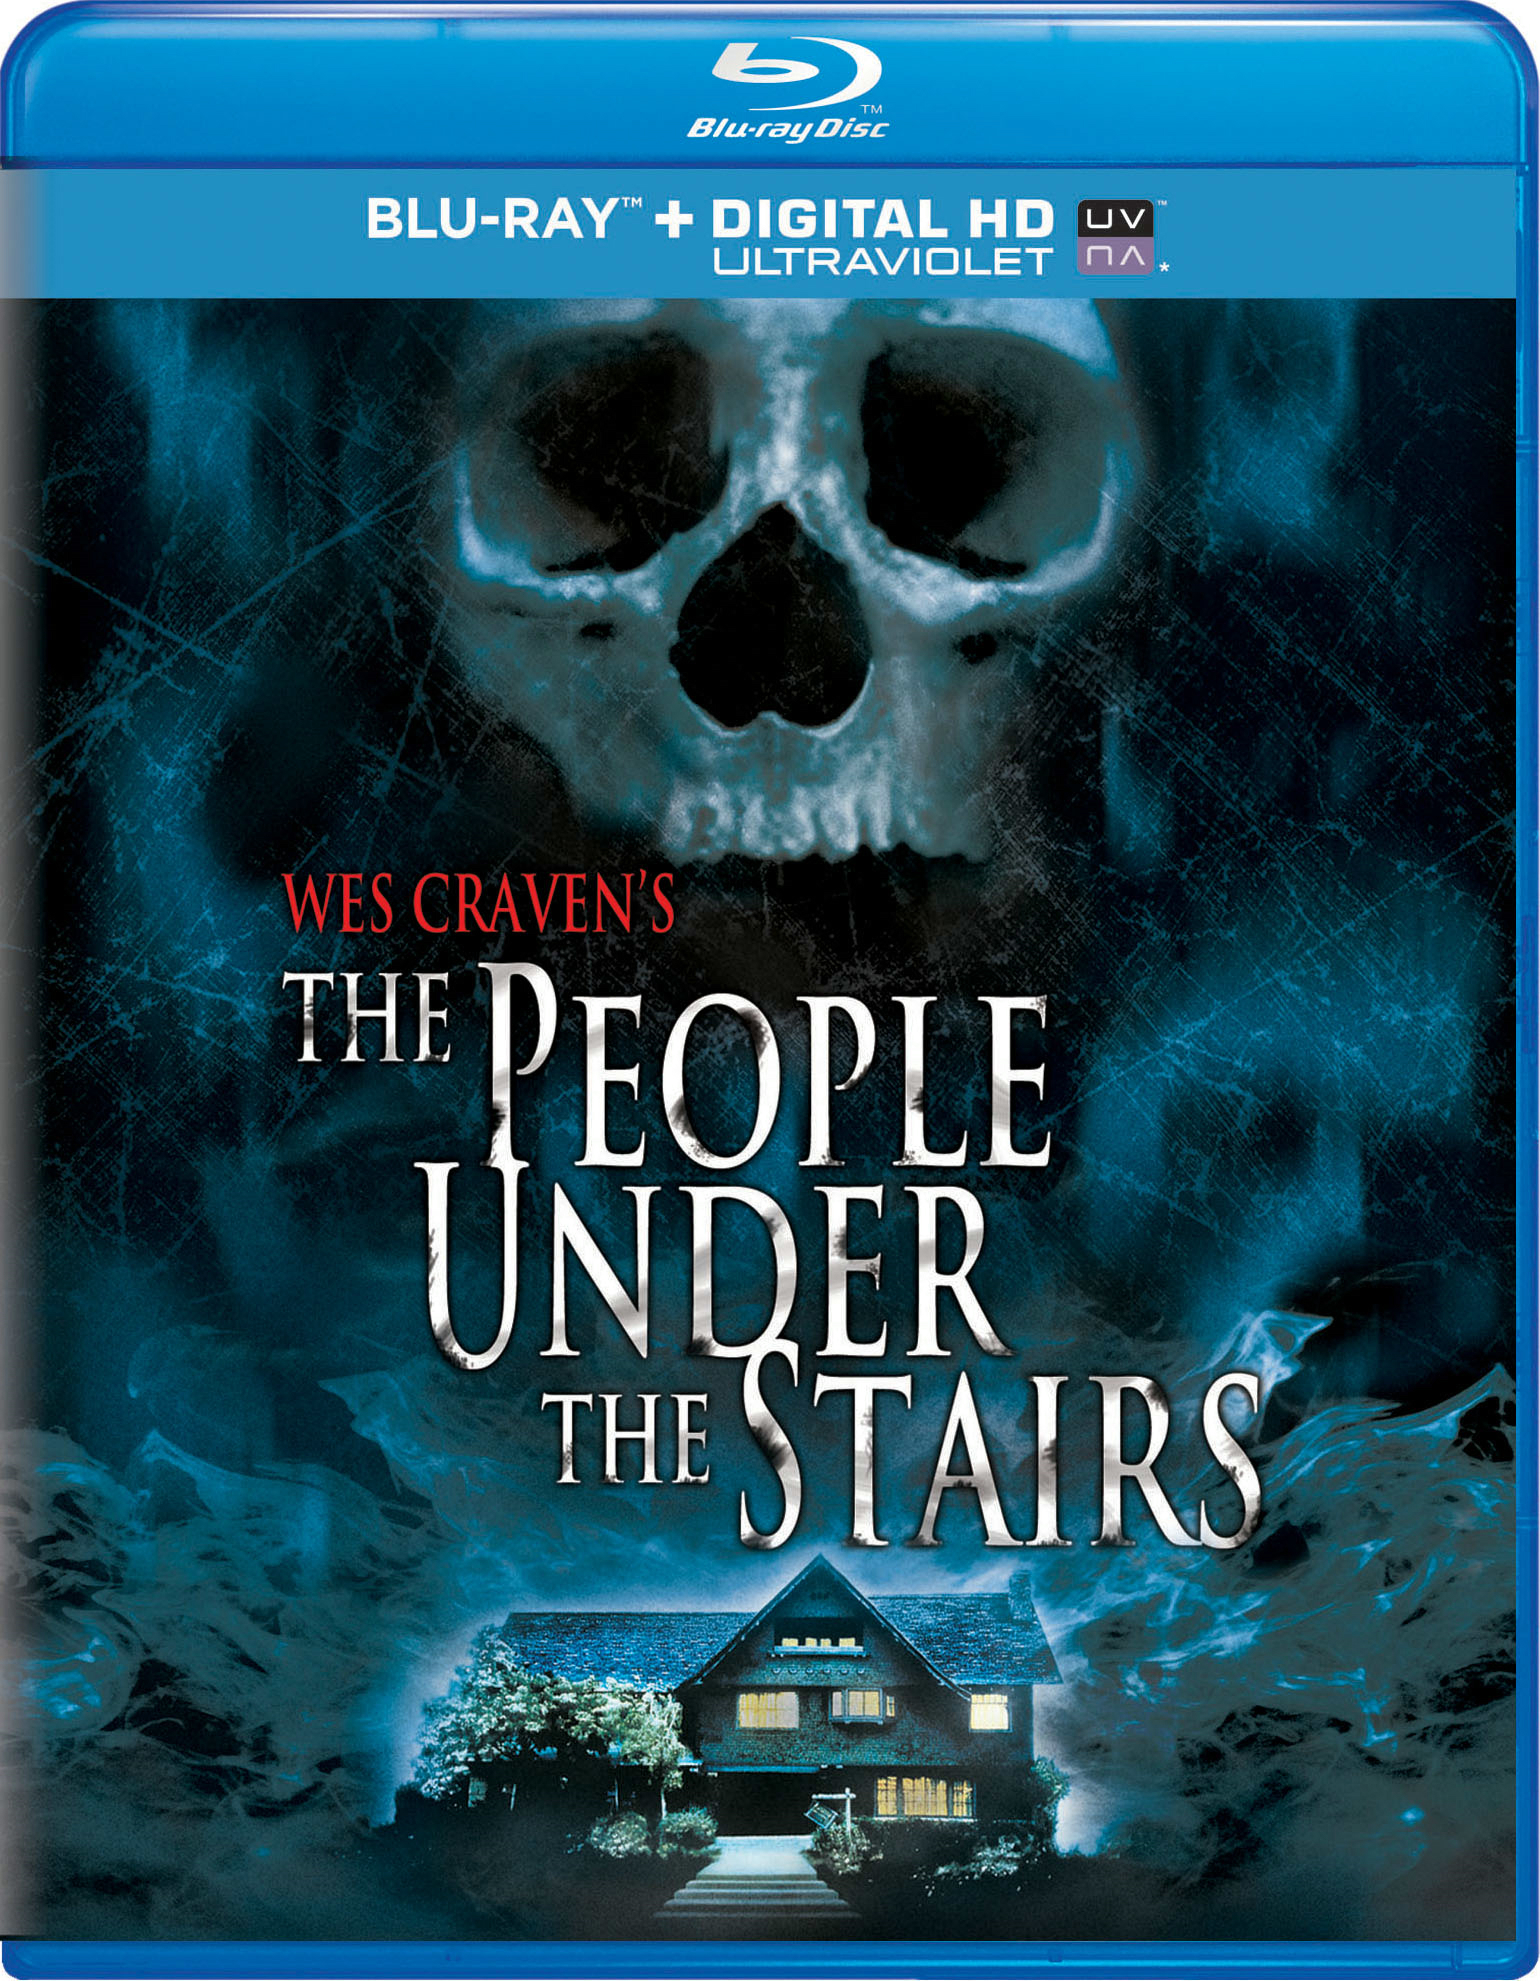 The People Under The Stairs (Blu-ray) - Blu-ray [ 1991 ]  - Horror Movies On Blu-ray - Movies On GRUV